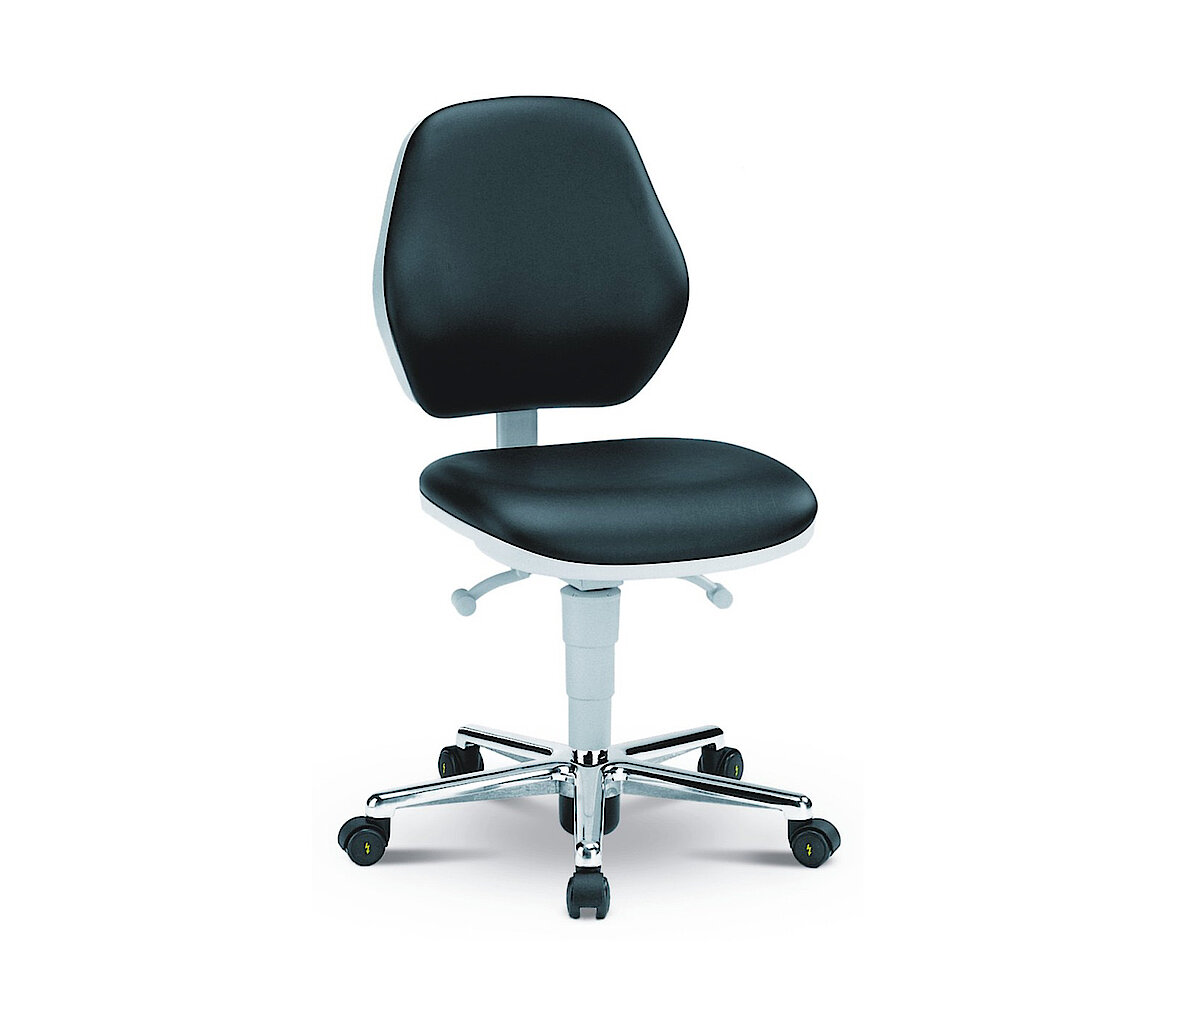 Cleanroom chair Basic with castors, low backrest